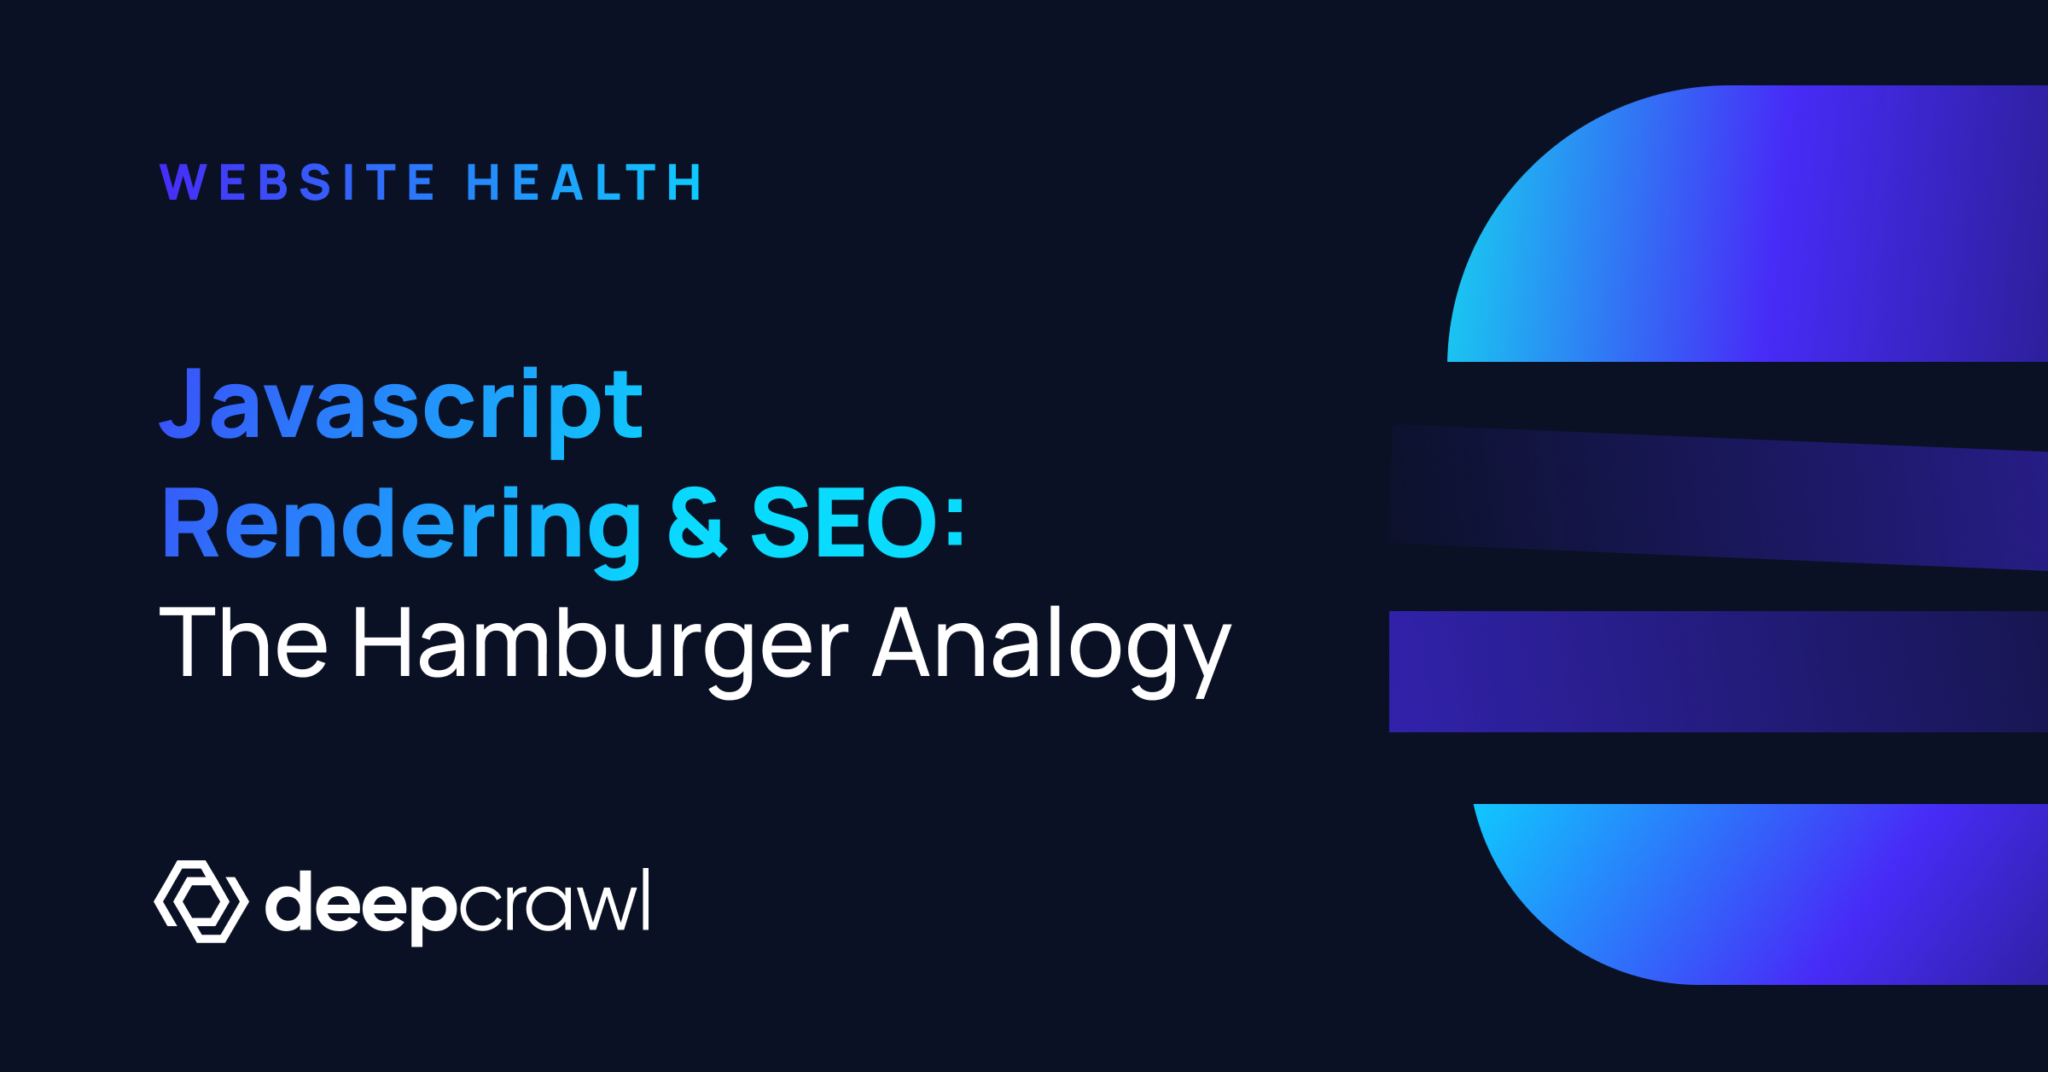 Article: How does Javascript rendering impact SEO? Consider the Hamburger Analogy.